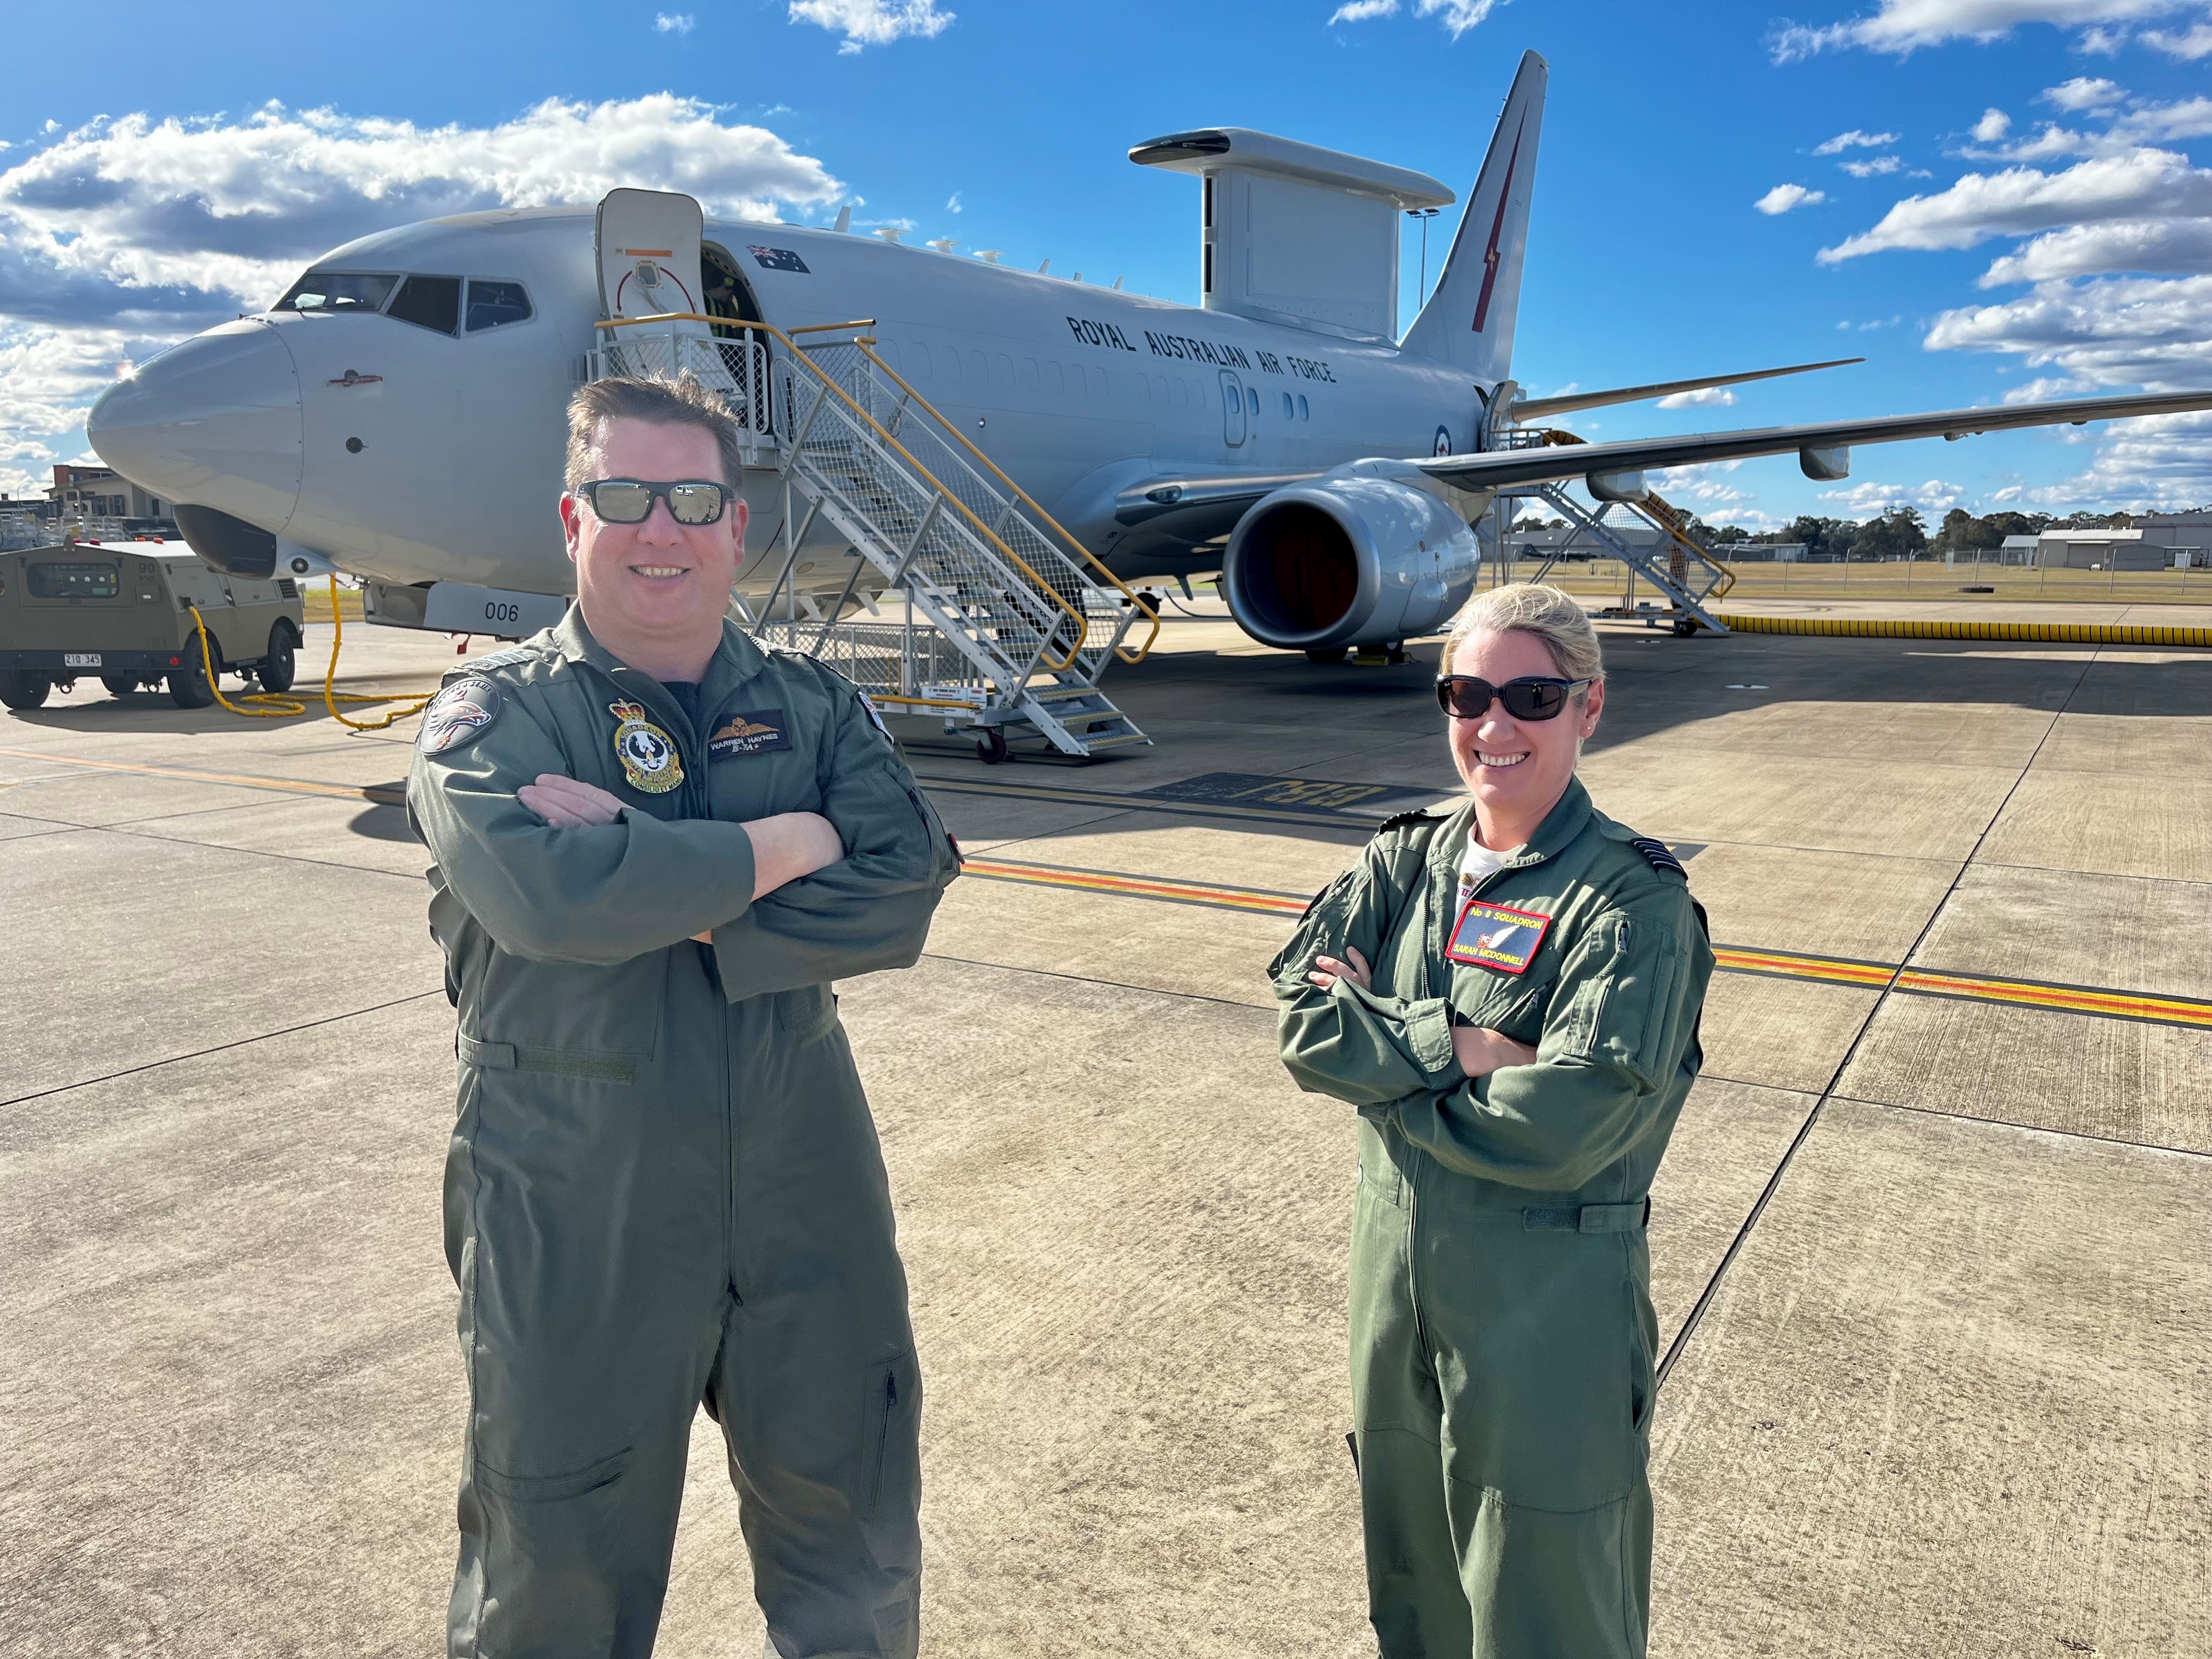 2 pilots stood in front of the Wedgetail aircraft.